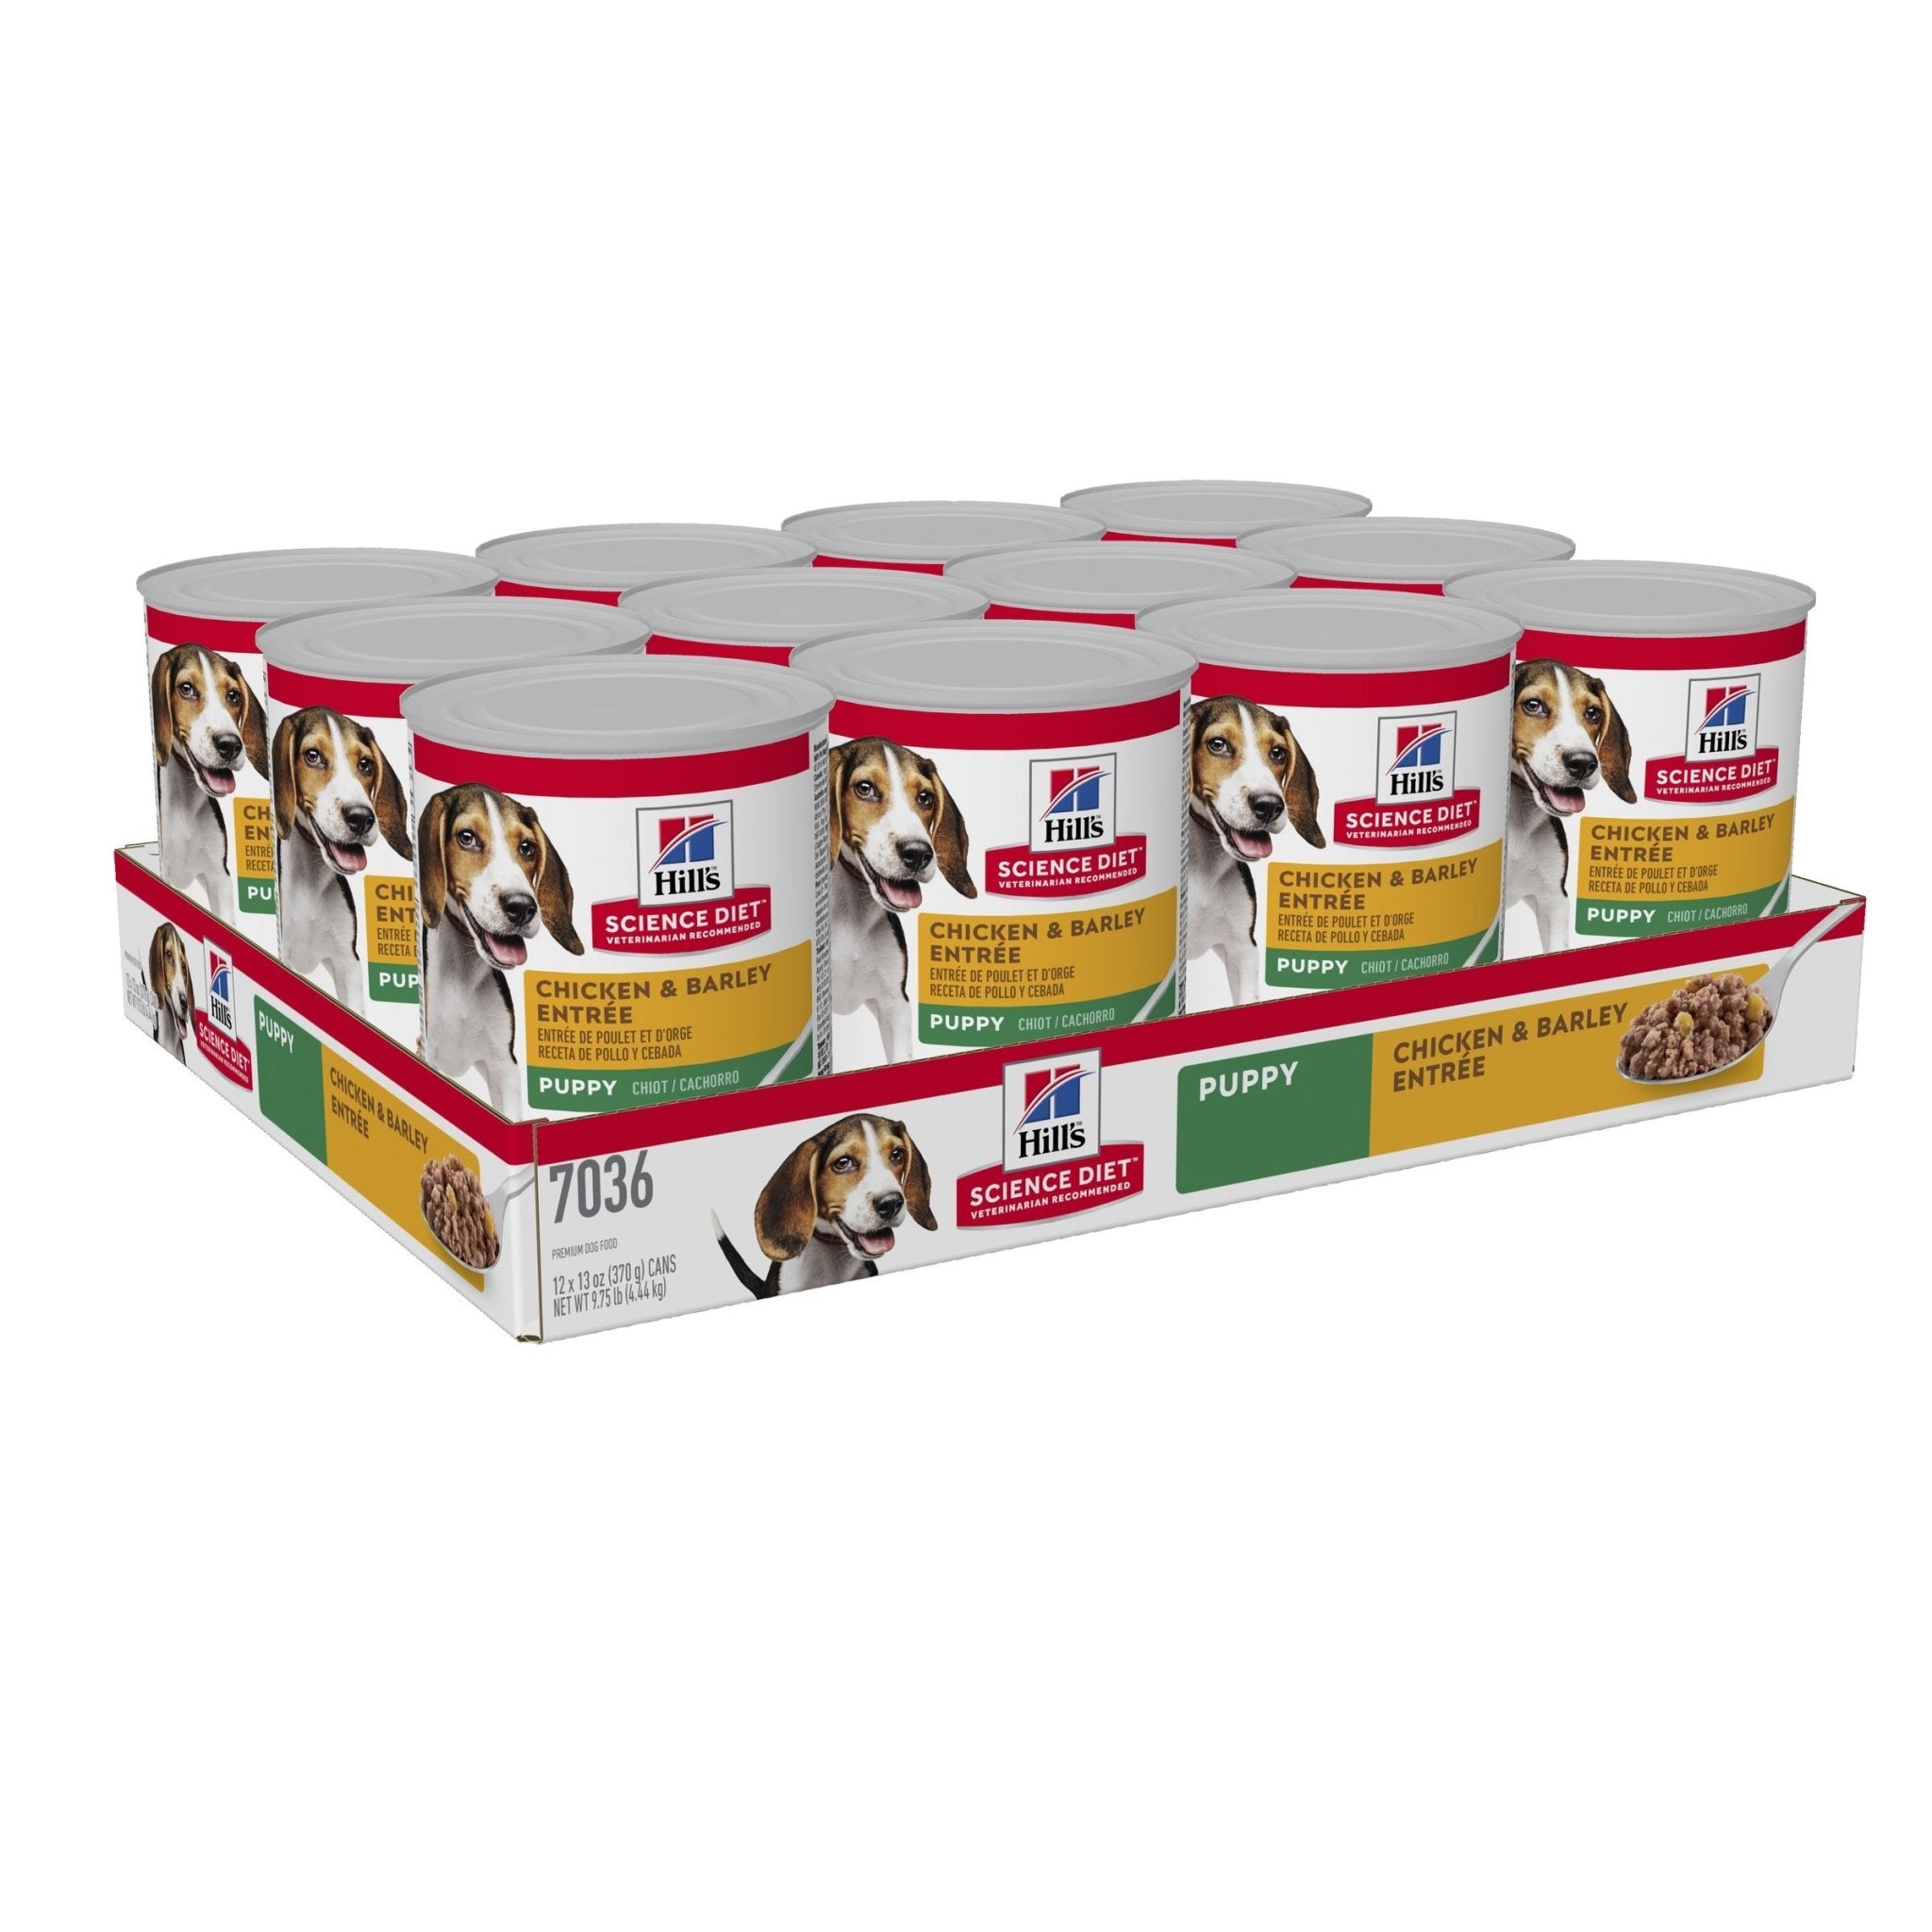 Hill's Science Diet Puppy Chicken & Barley Entrée Canned Dog Food, 370g, 12 Pack